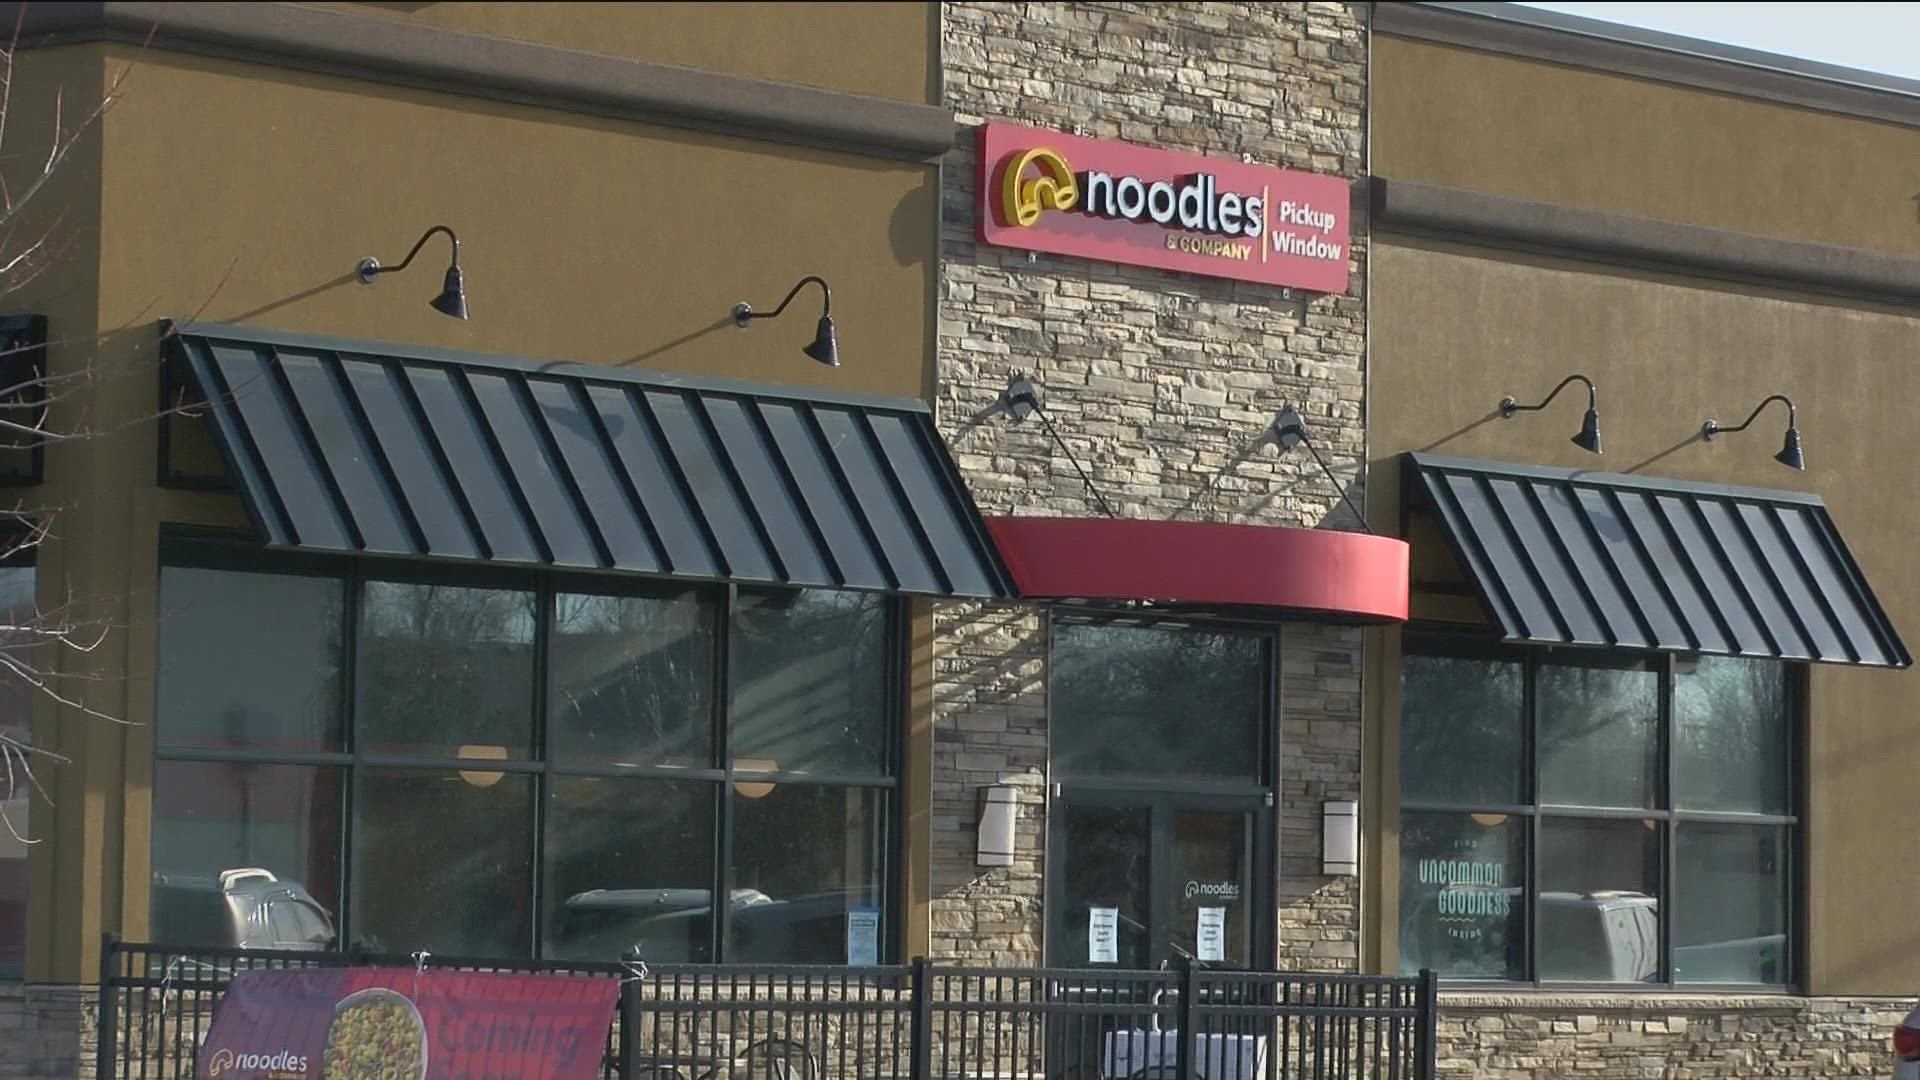 Noodles & Company is opening Jan. 3 near Target and Hobby Lobby at the former location of Moe's.